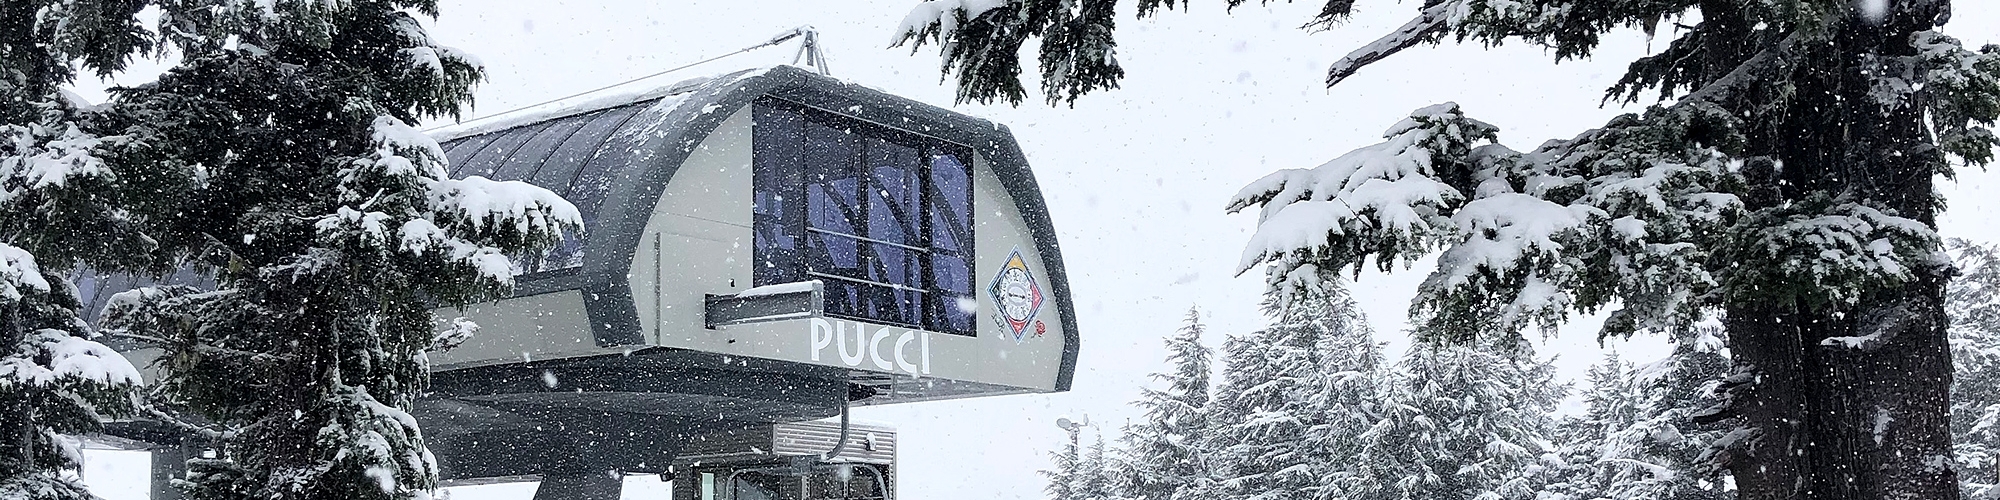 PUCCI CHAIRLIFT